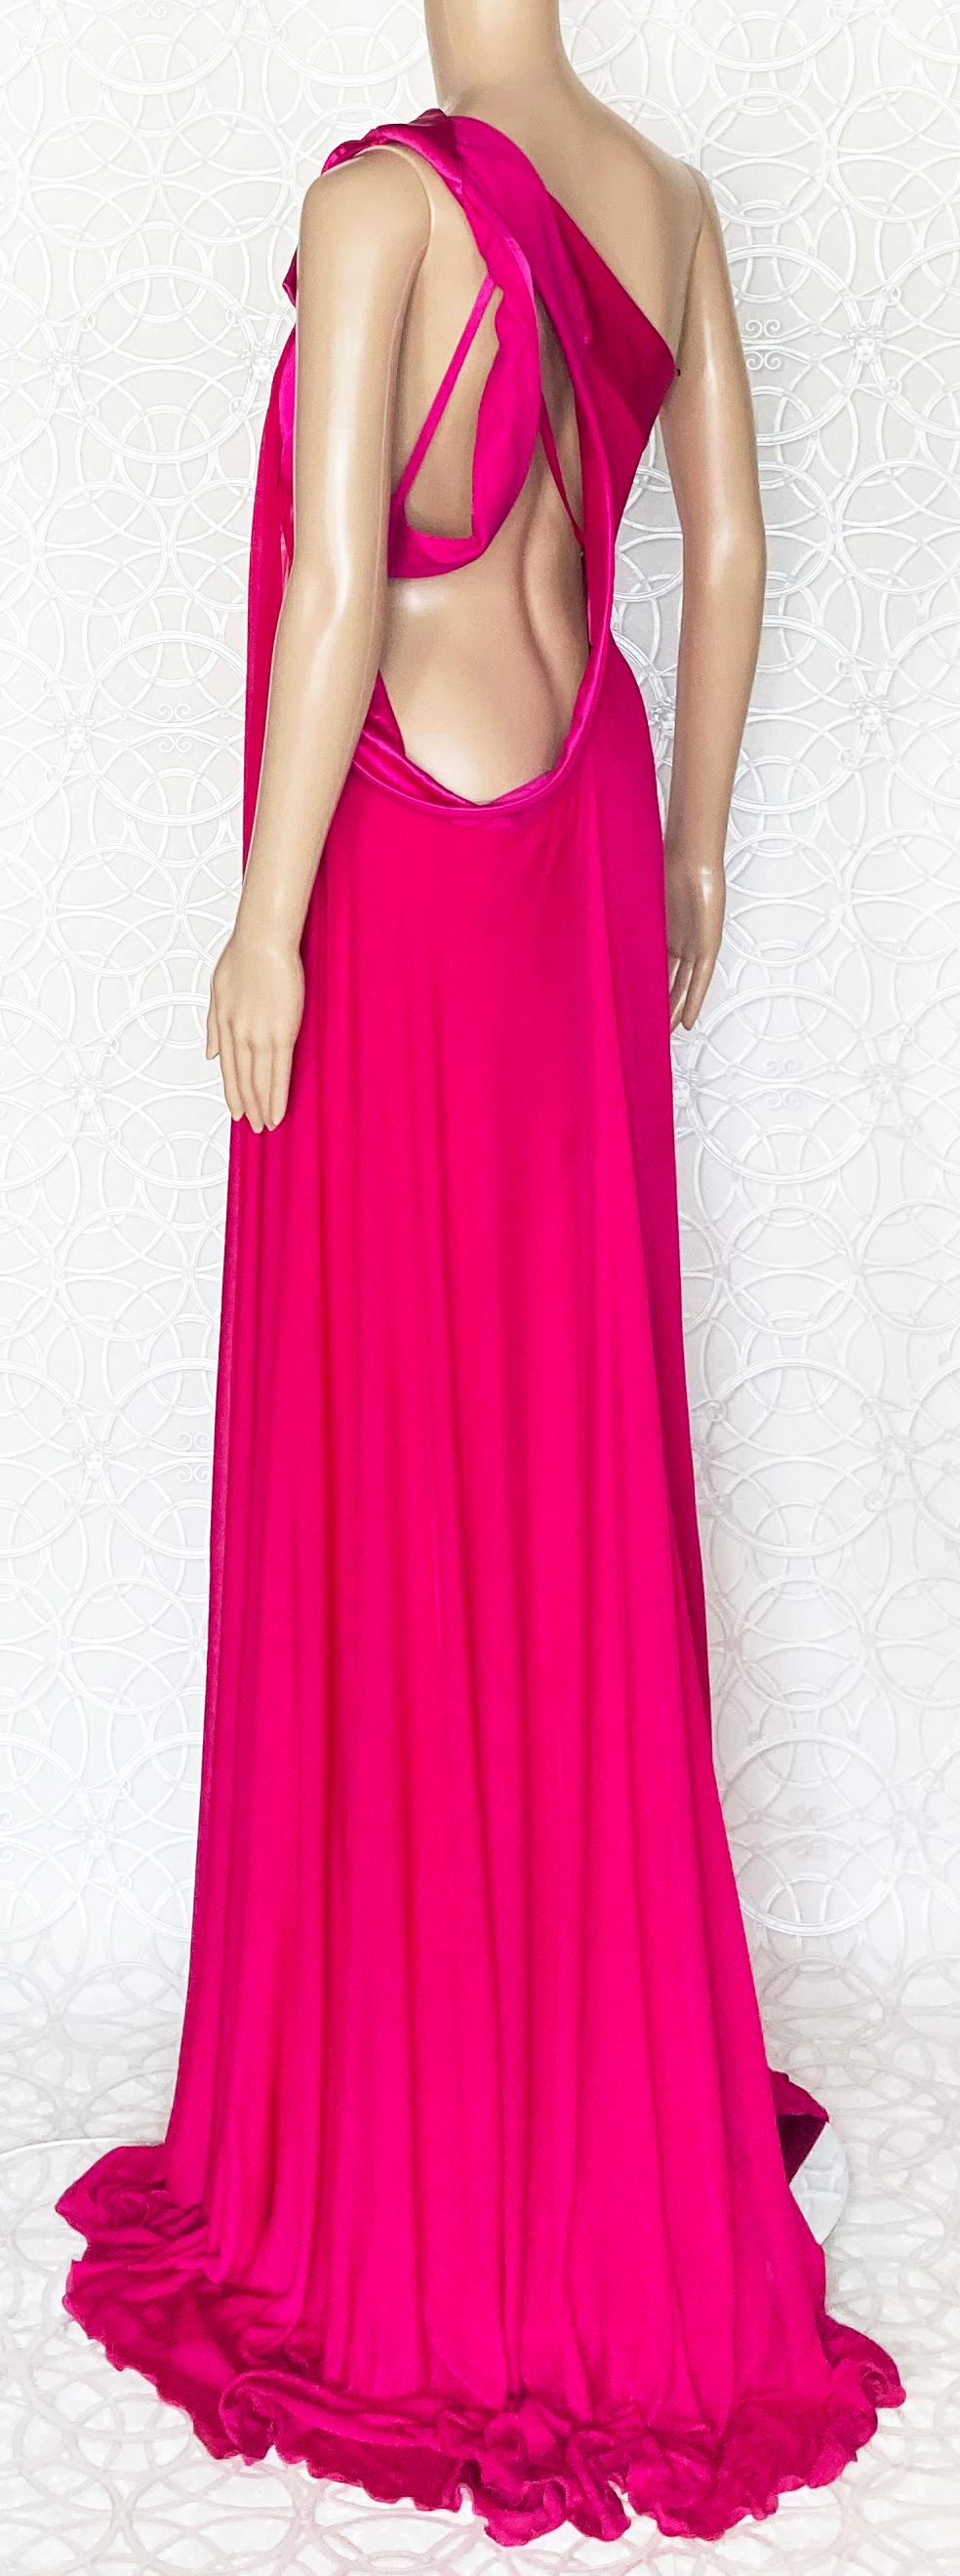 Women's NEW VERSACE FUCHSIA SILK ONE SHOULDER OPEN BACK Gown 44 - 8 For Sale